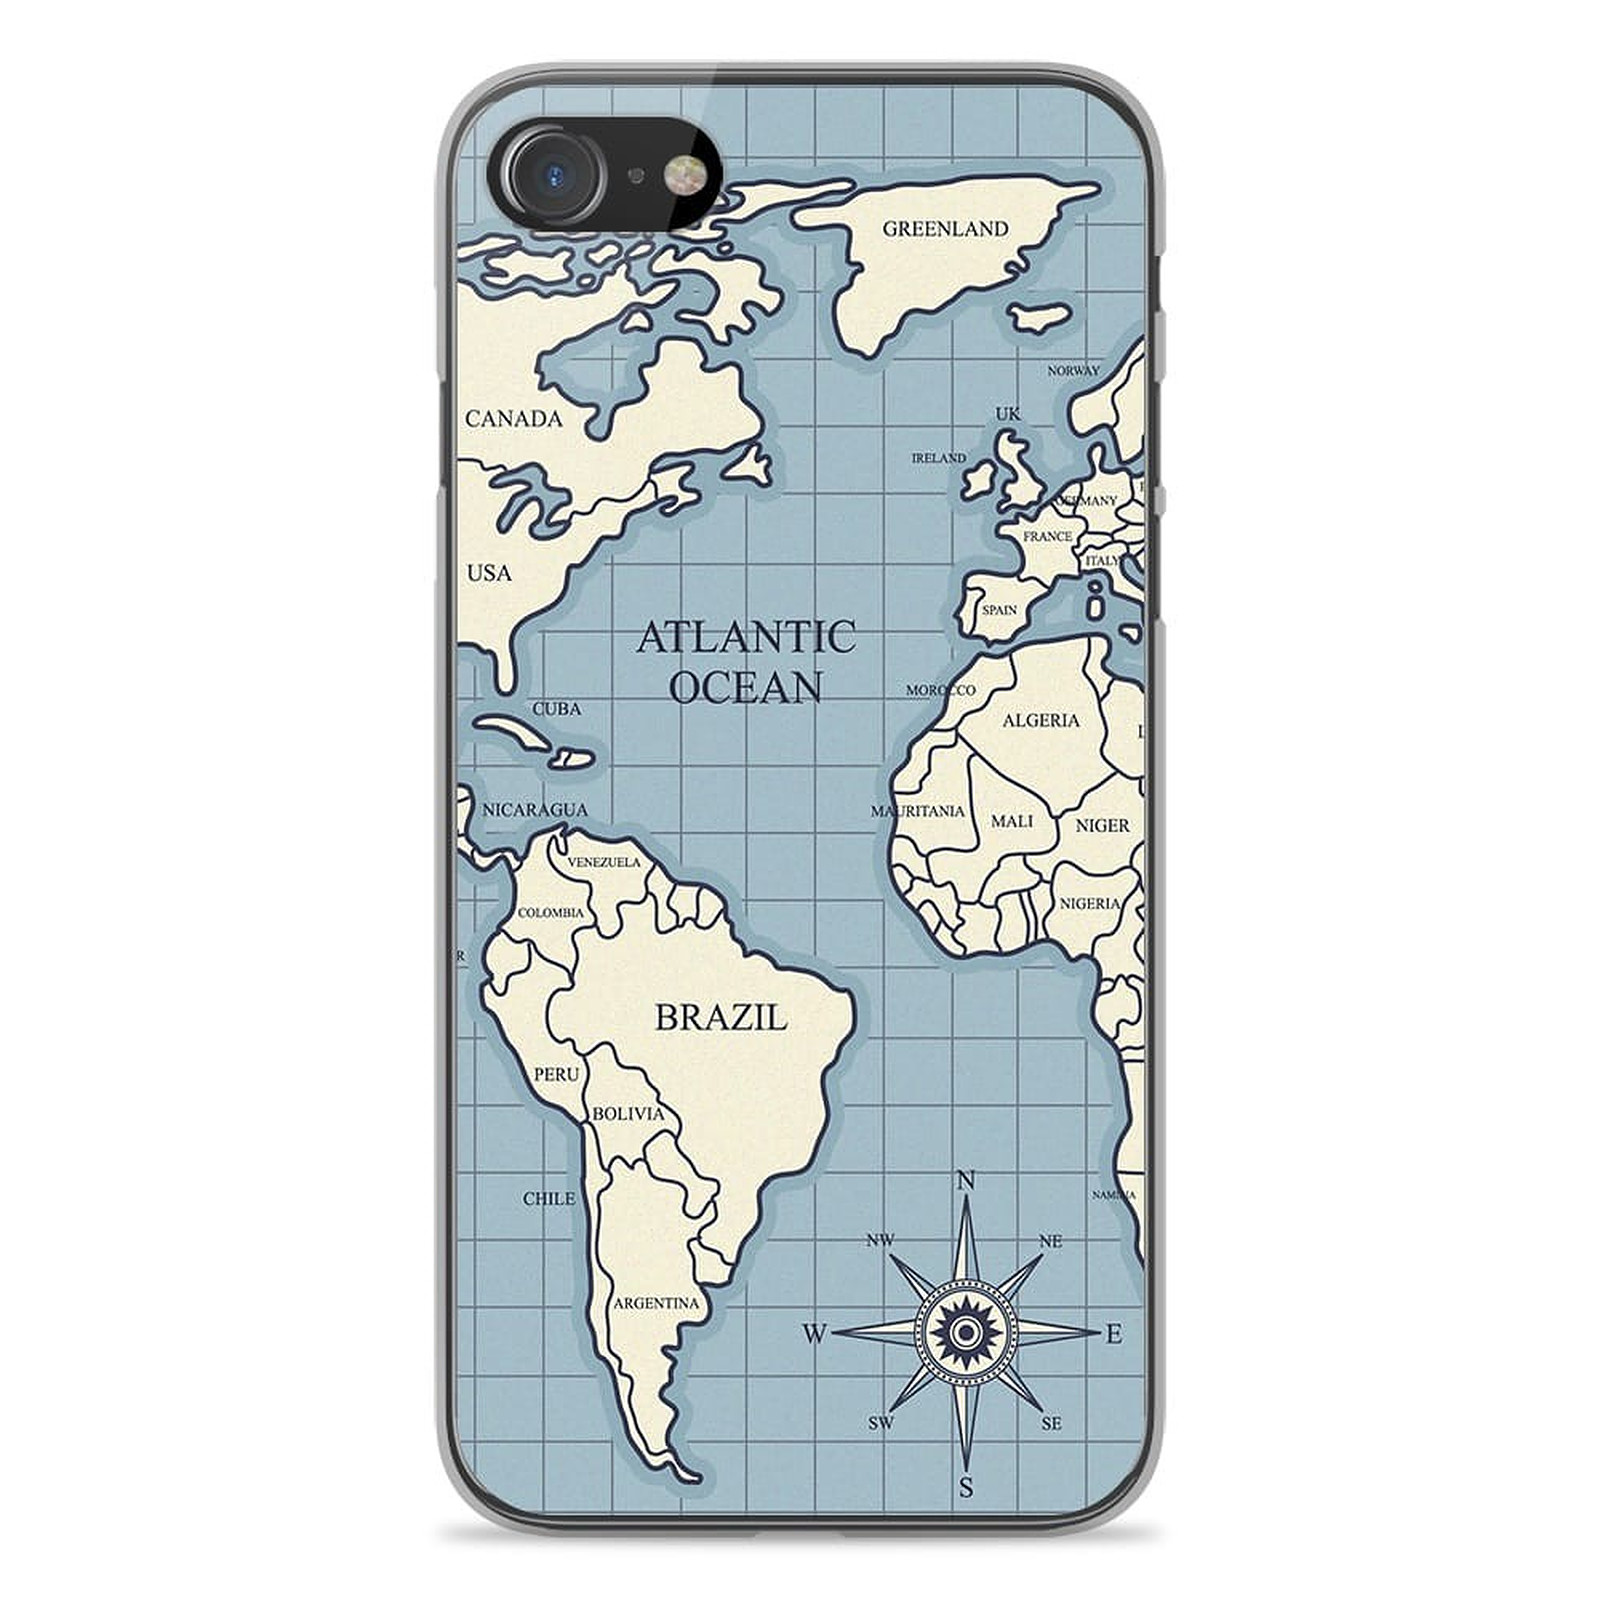 1001 Coques Coque silicone gel Apple iPhone SE 2020 motif Map vintage - Coque telephone 1001Coques